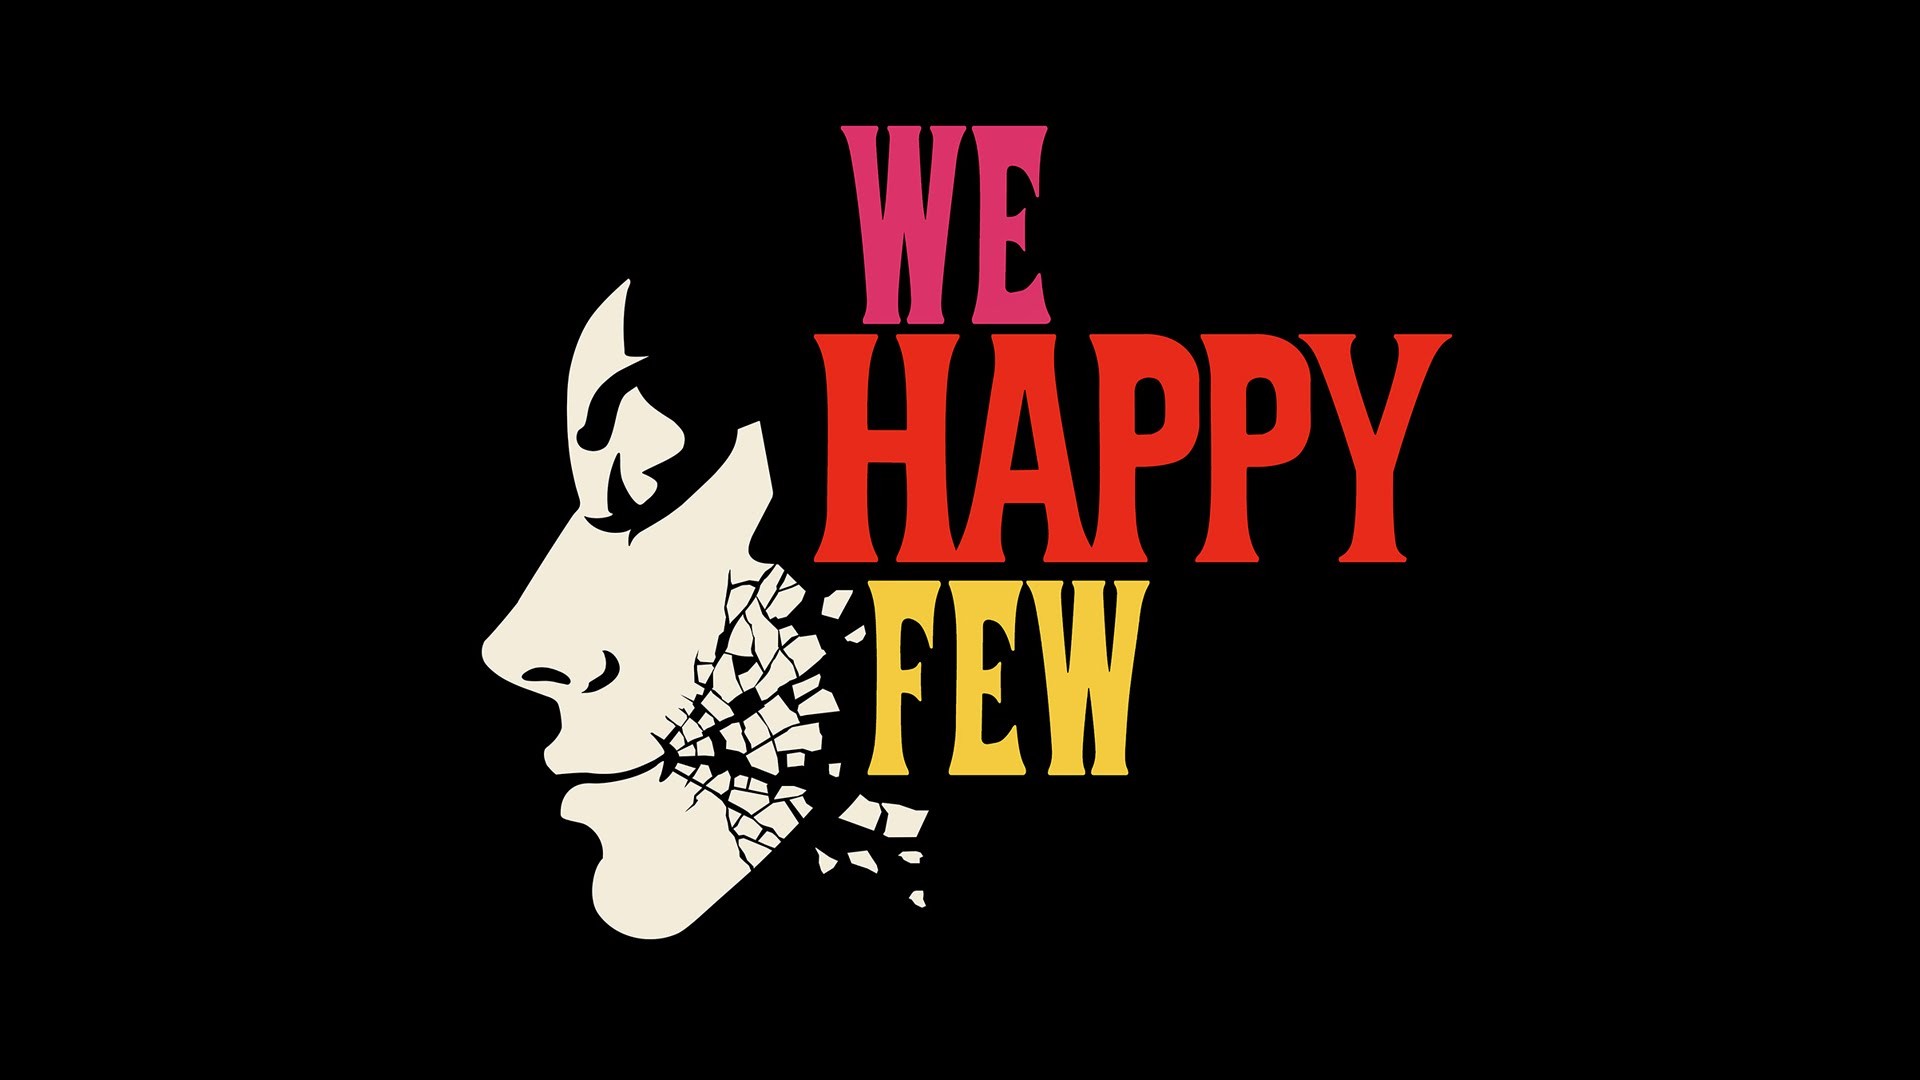 Best We Happy Few Background for mobile